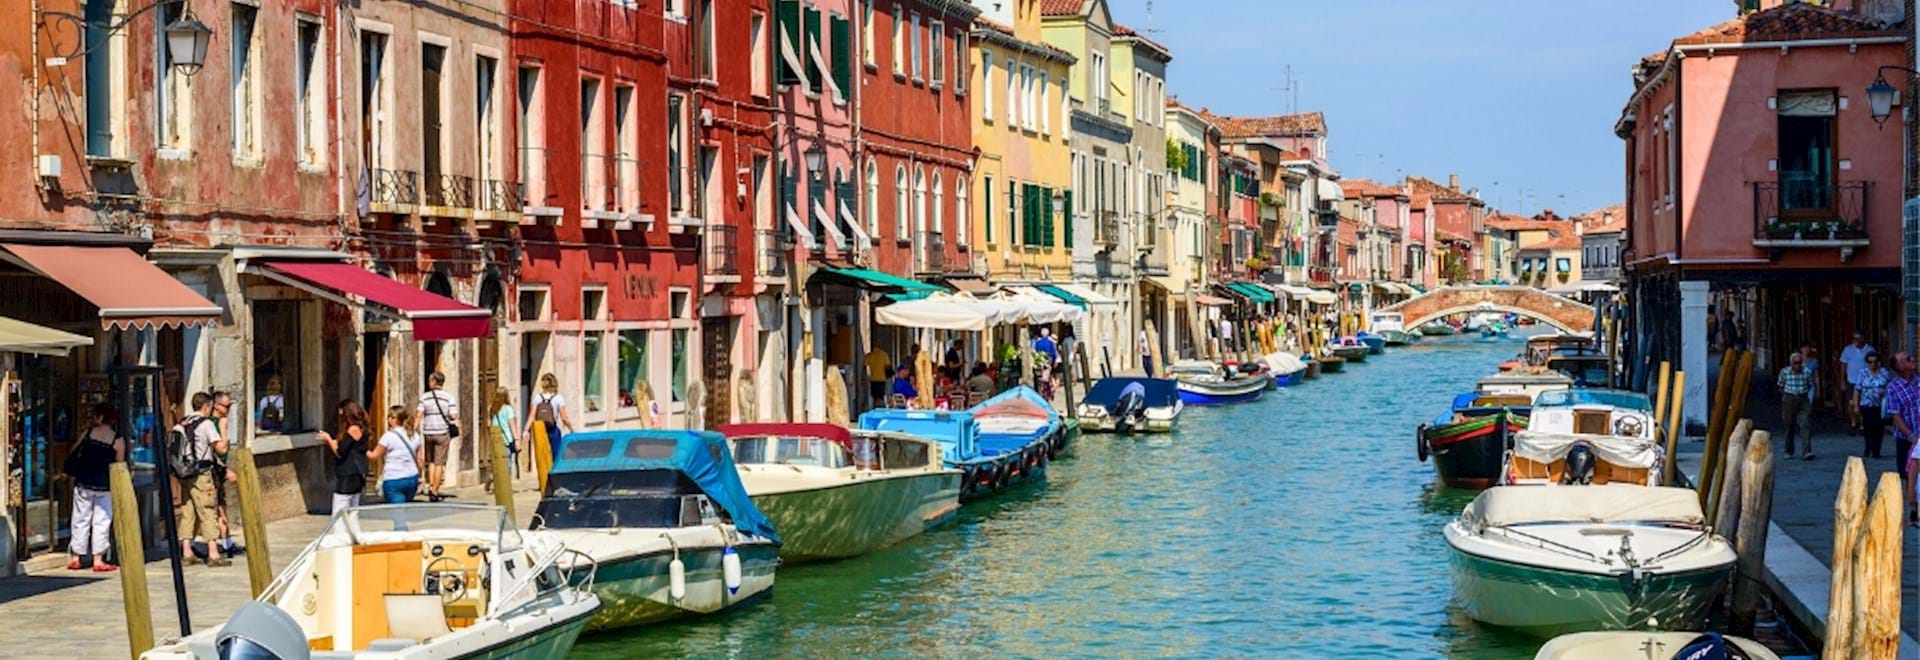 Main Canal of Murano in Venice